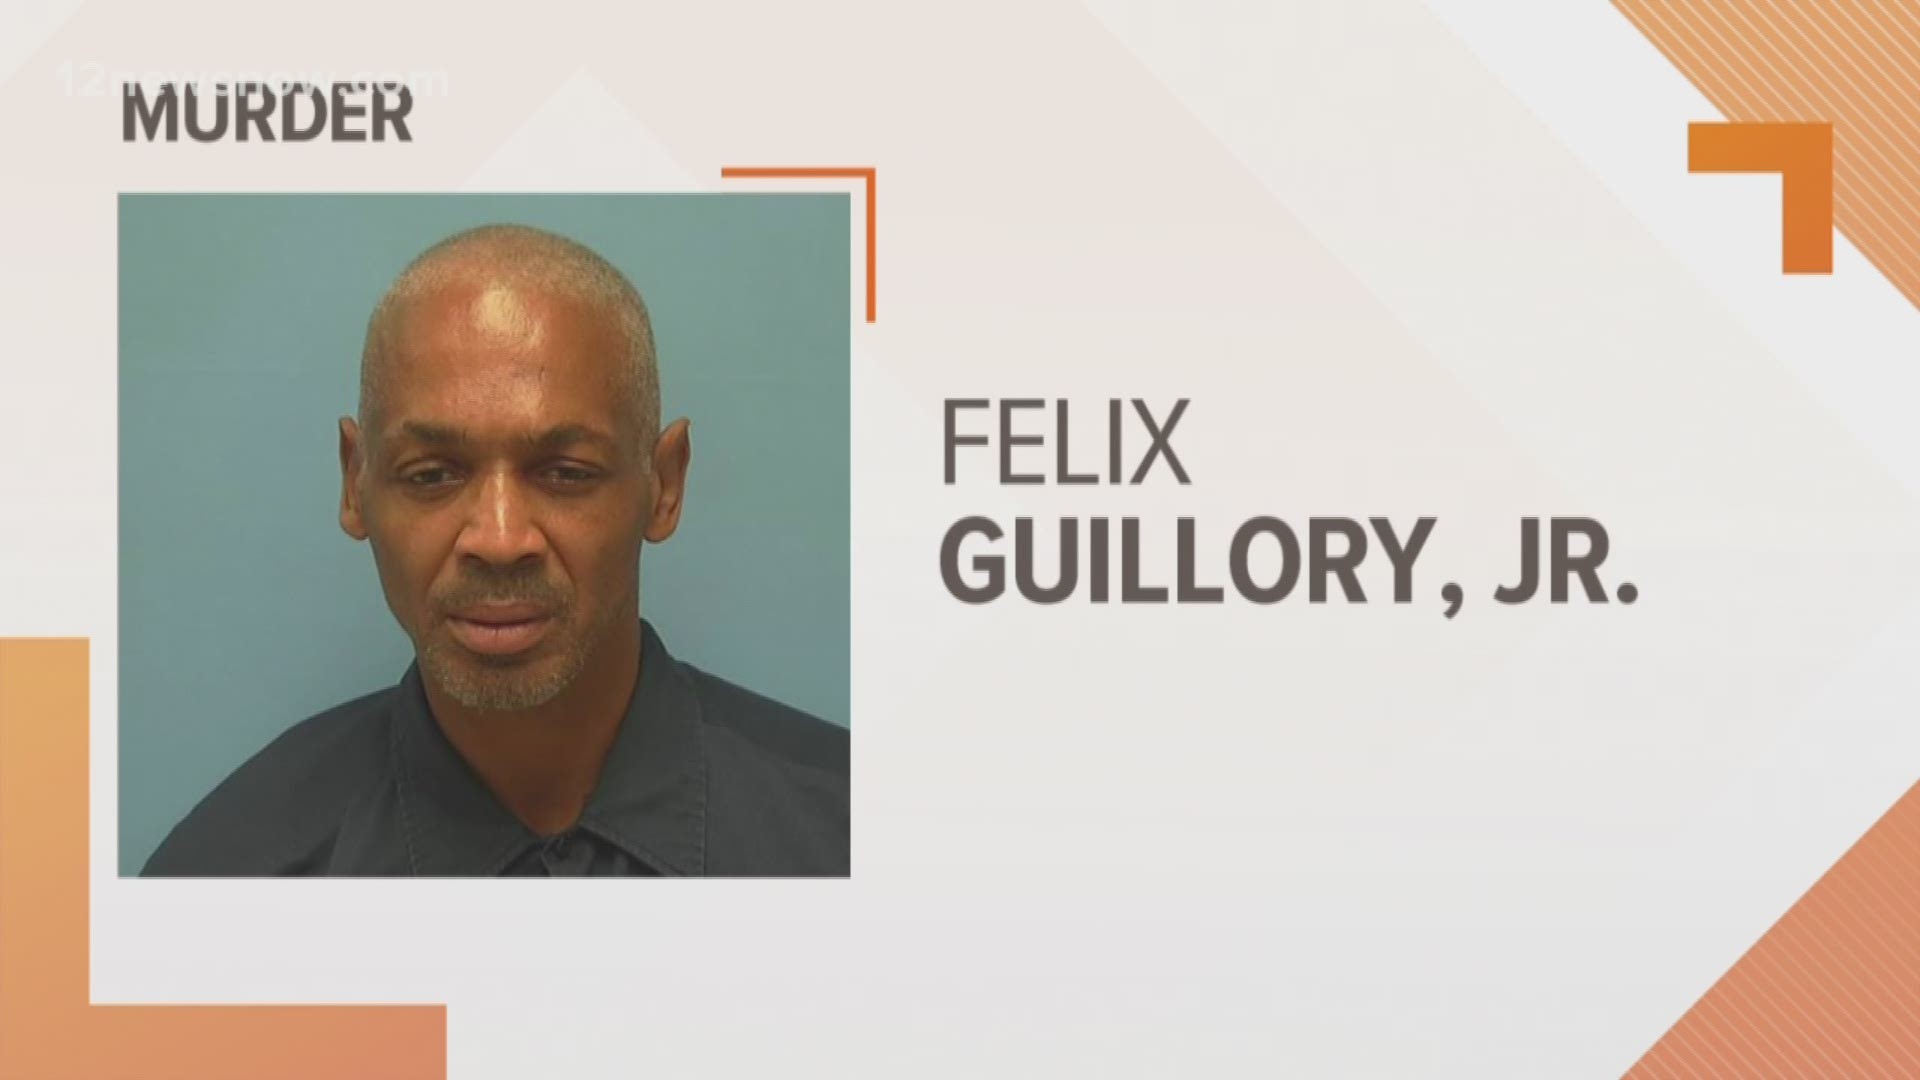 52-year-old Felix Guillory Jr. has been charged with the murder of 39-year-old Shane Cooper back in 206. Police found Cooper's body in the 500 block of North Street. DNA testing led to Guillory's indictment.